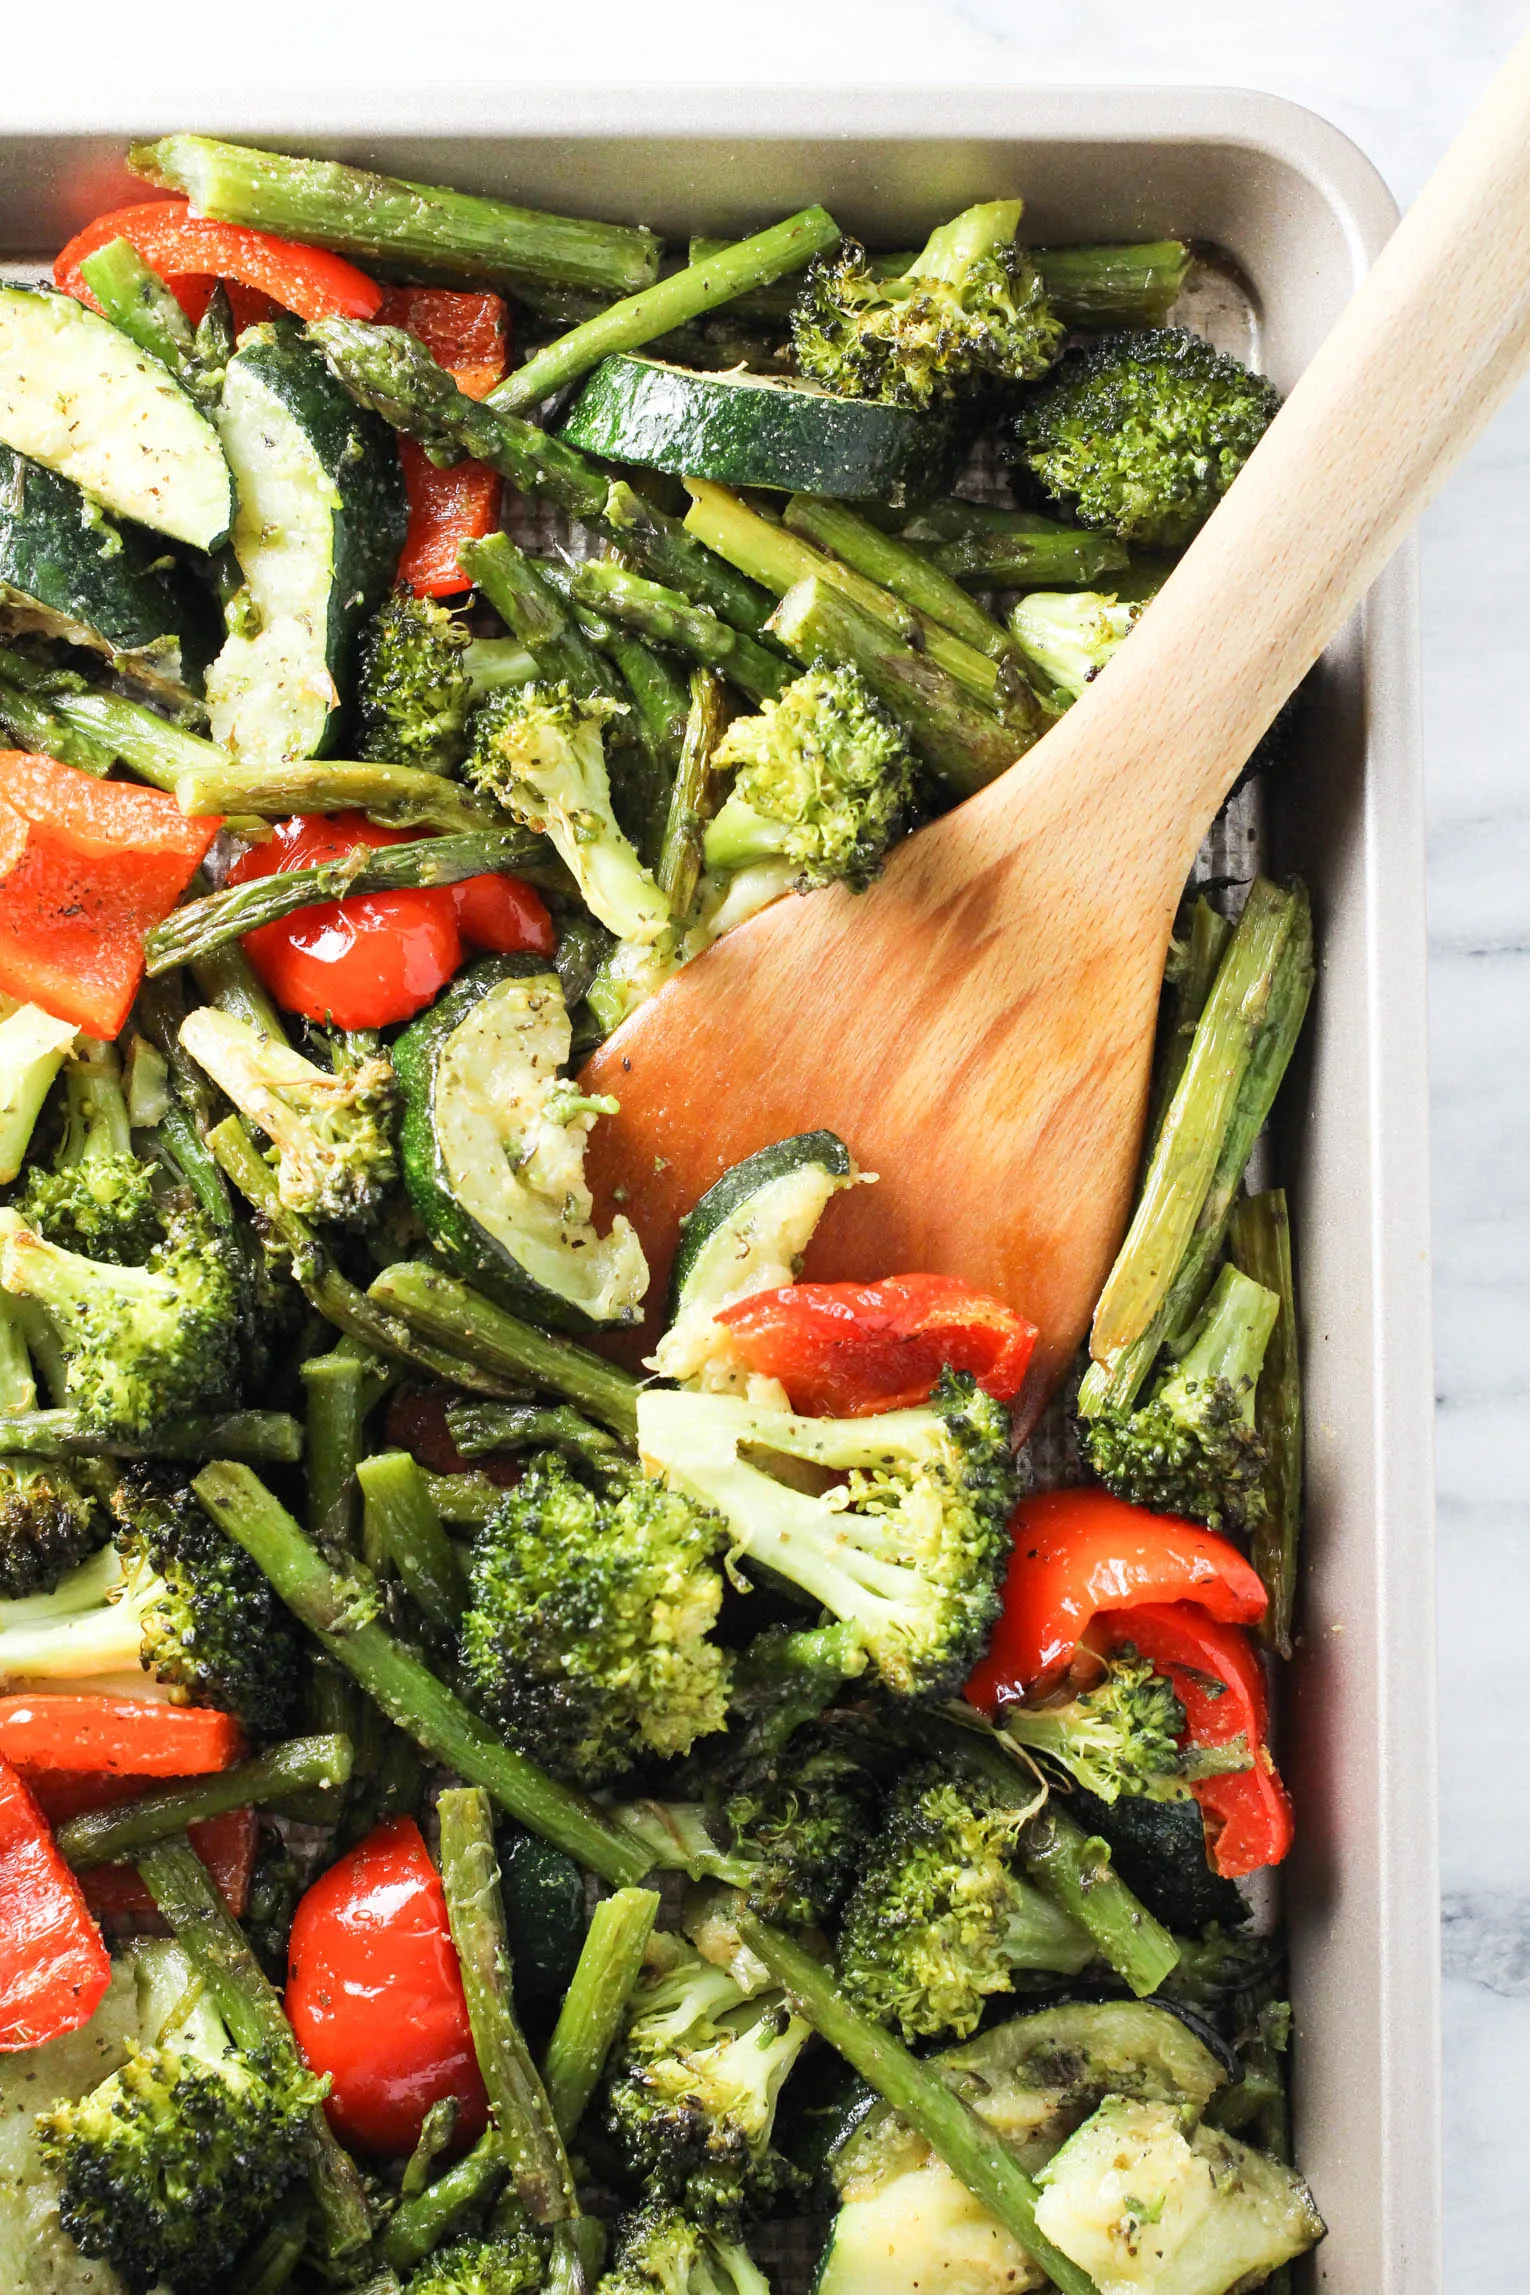 Roasted mixed vegetables on a baking sheet being scooped with a wooden spatula.